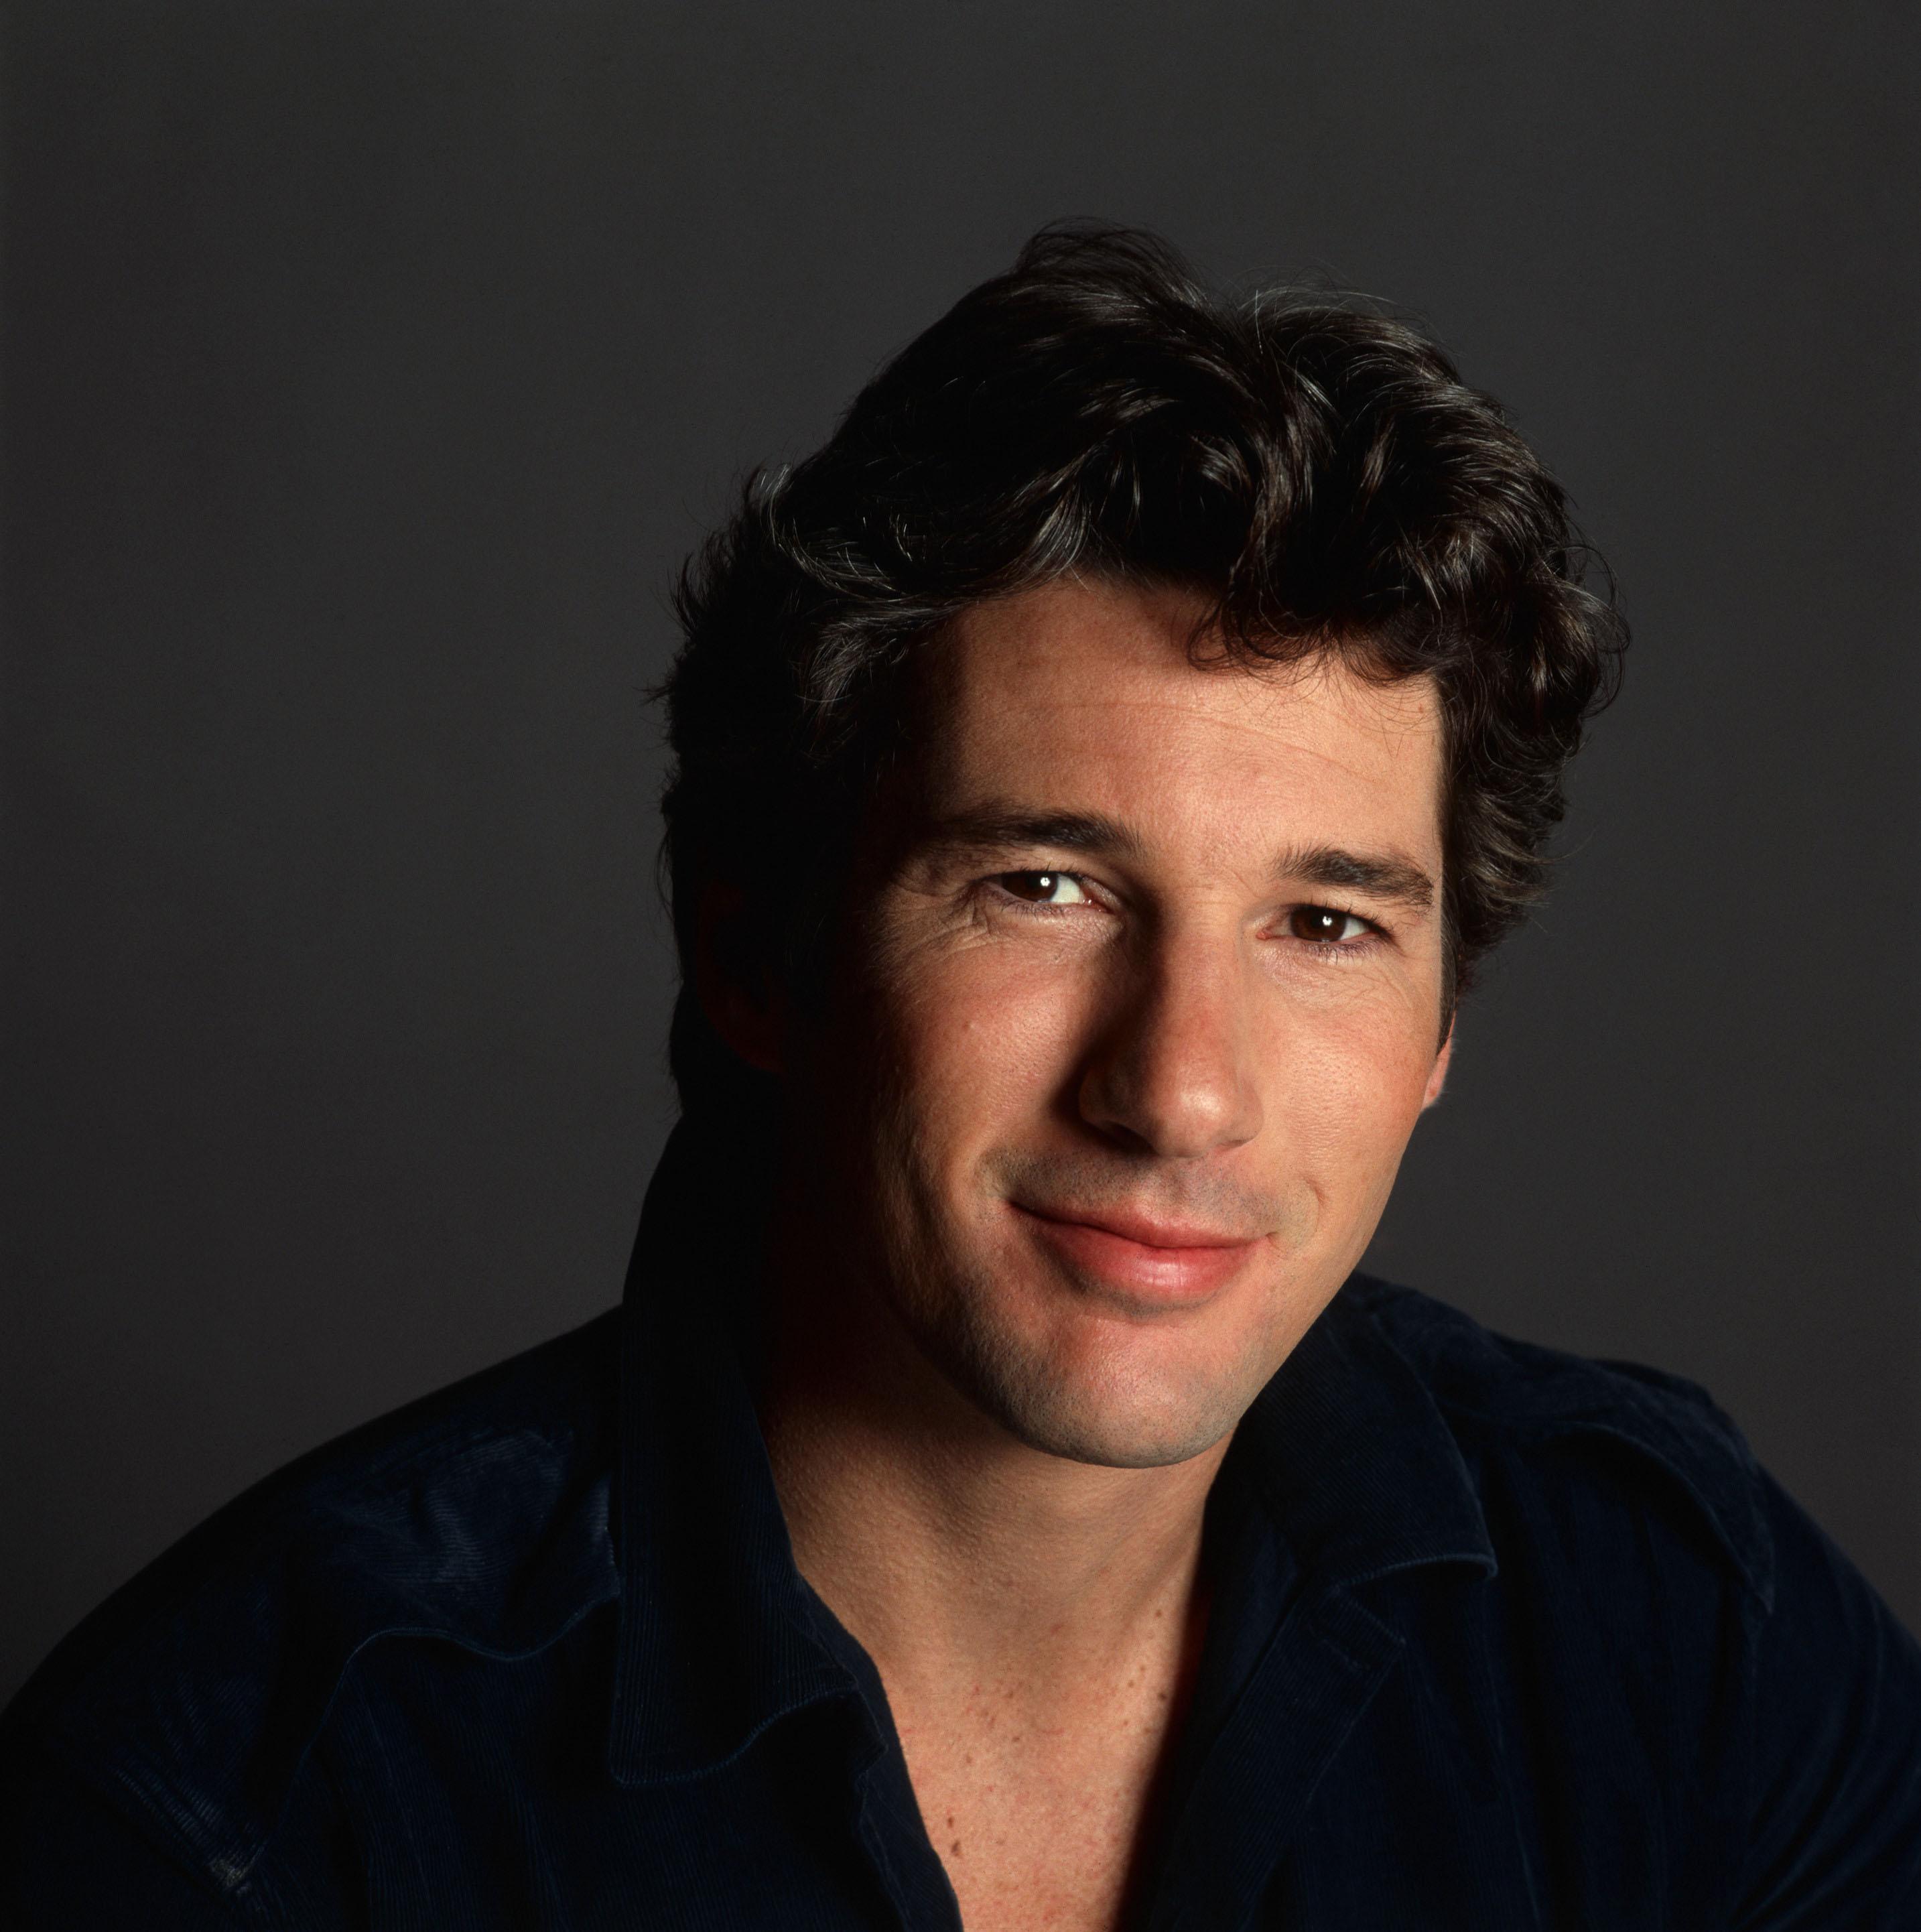 Awesome Richard Gere Photo. Richard Gere Wallpaper